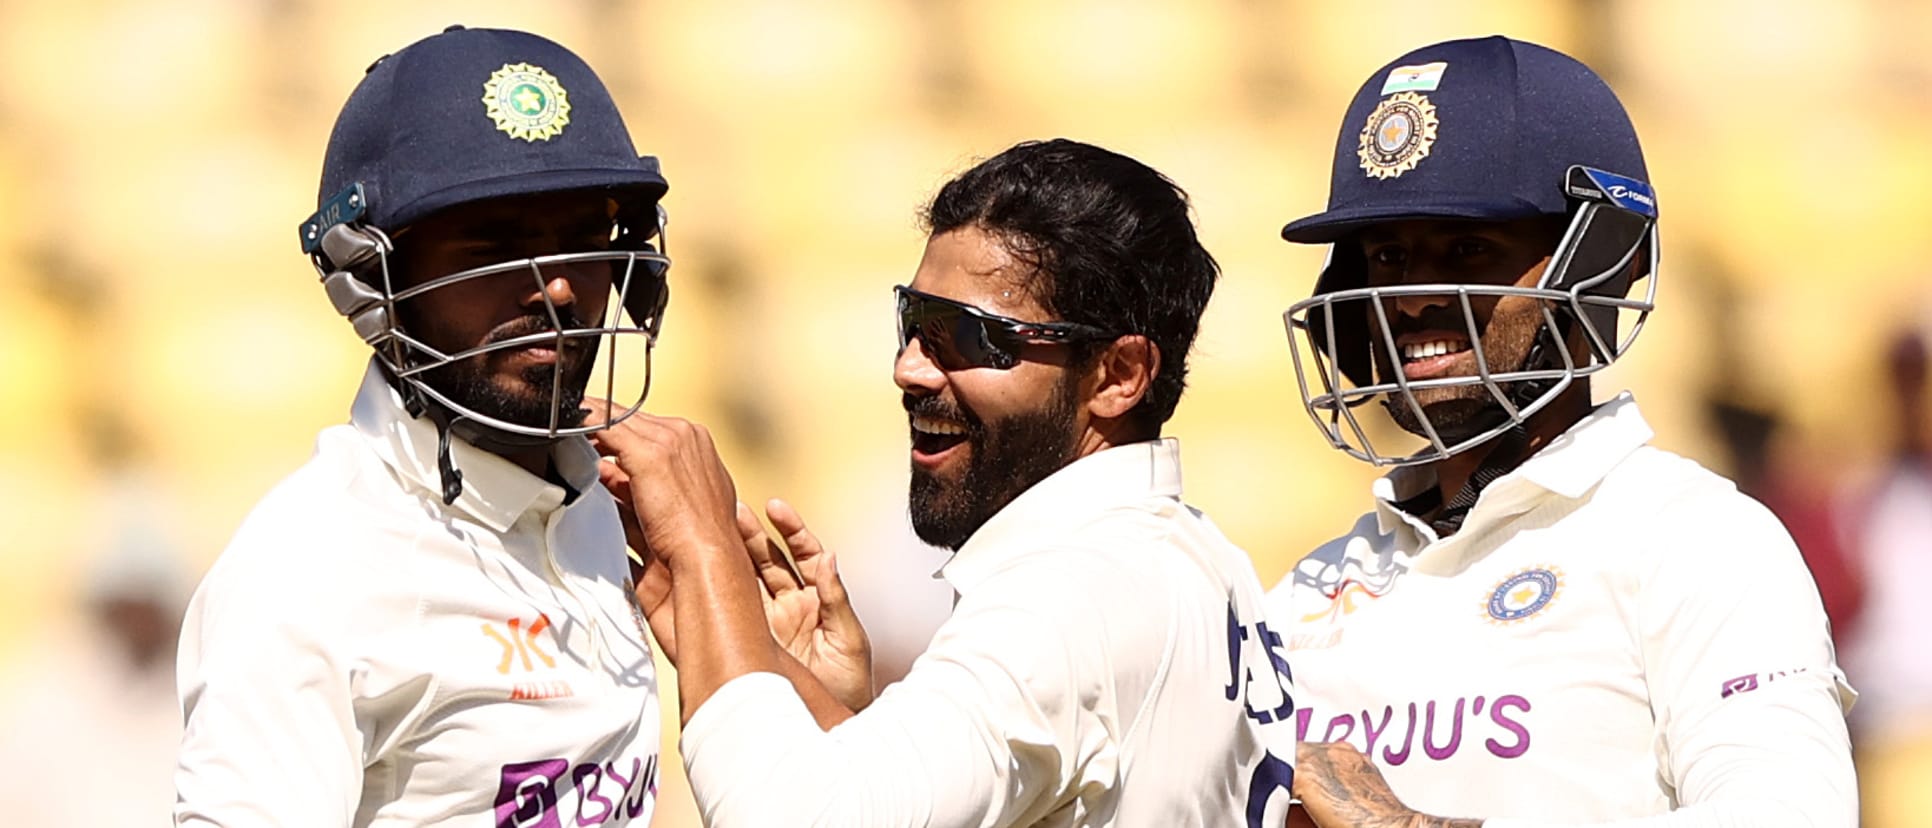 Ravindra Jadeja of India celebrates taking the wicket of Pat Cummins of Australia during day three of the First Test match in the series between India and Australia at Vidarbha Cricket Association Ground on February 11, 2023 in Nagpur, India.